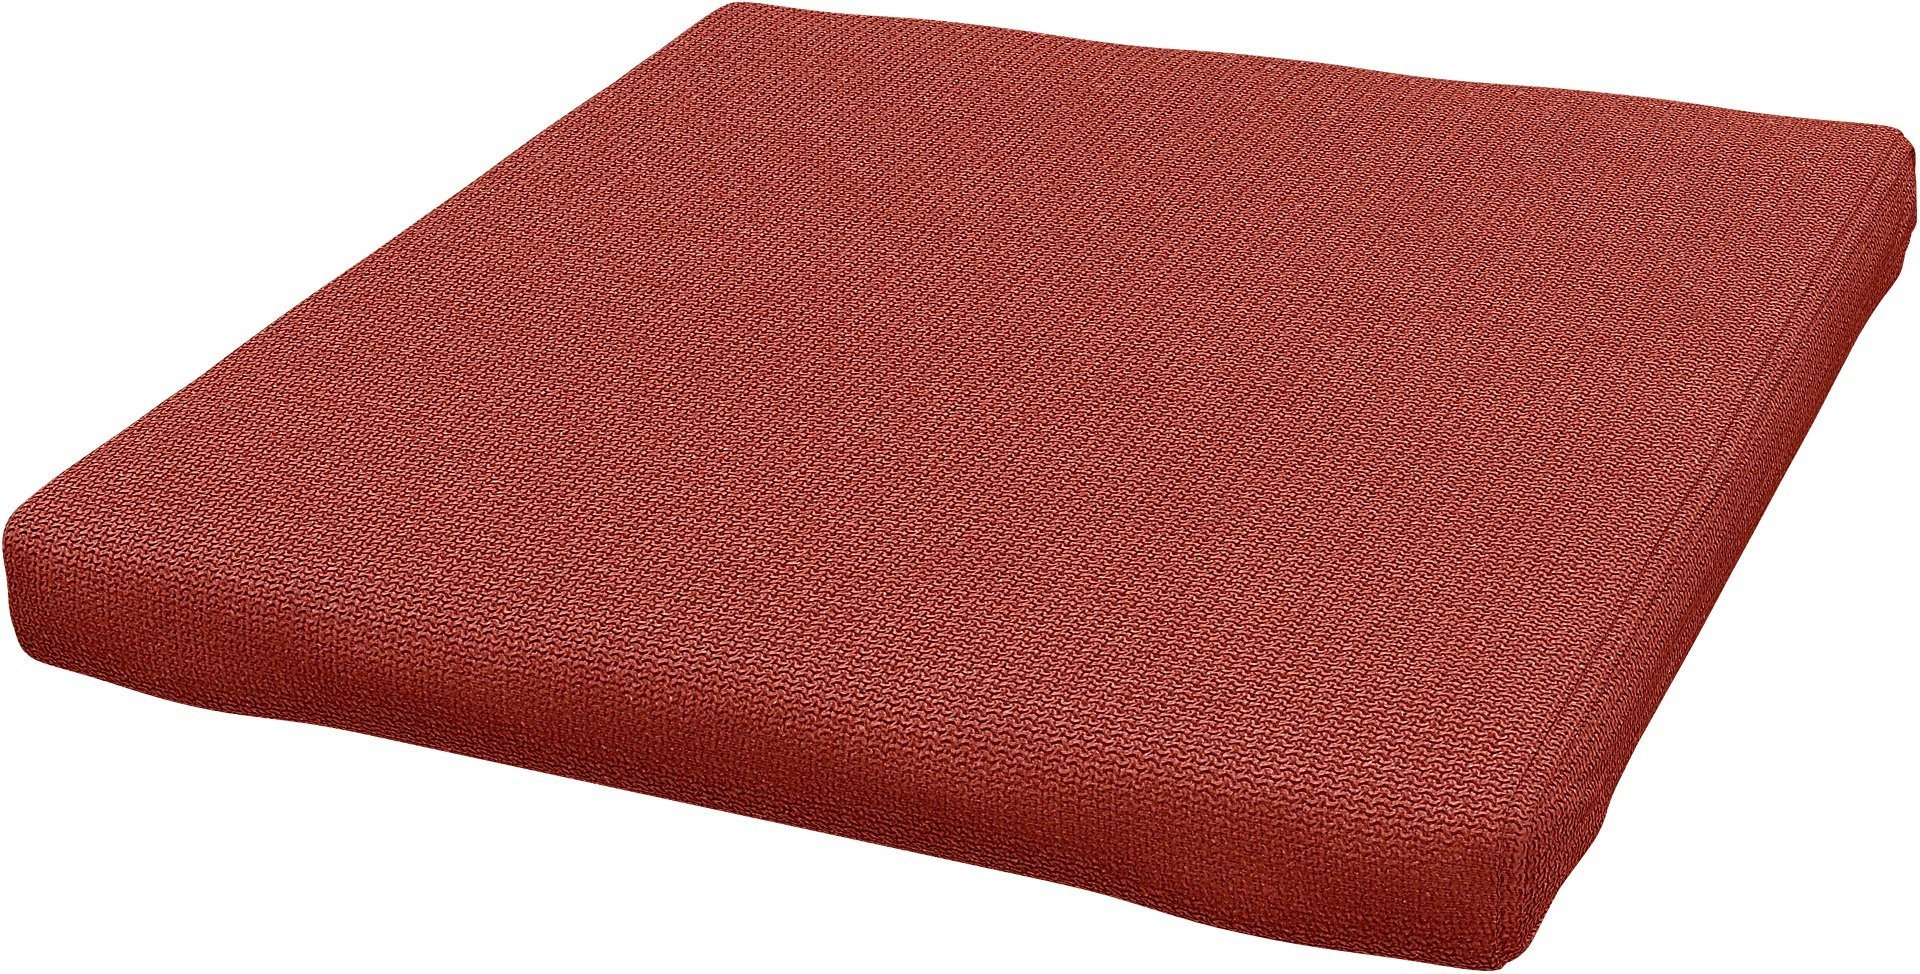 IKEA - Froson/Duvholmen Chair Seat Cushion Cover , Coral Red, Outdoor - Bemz